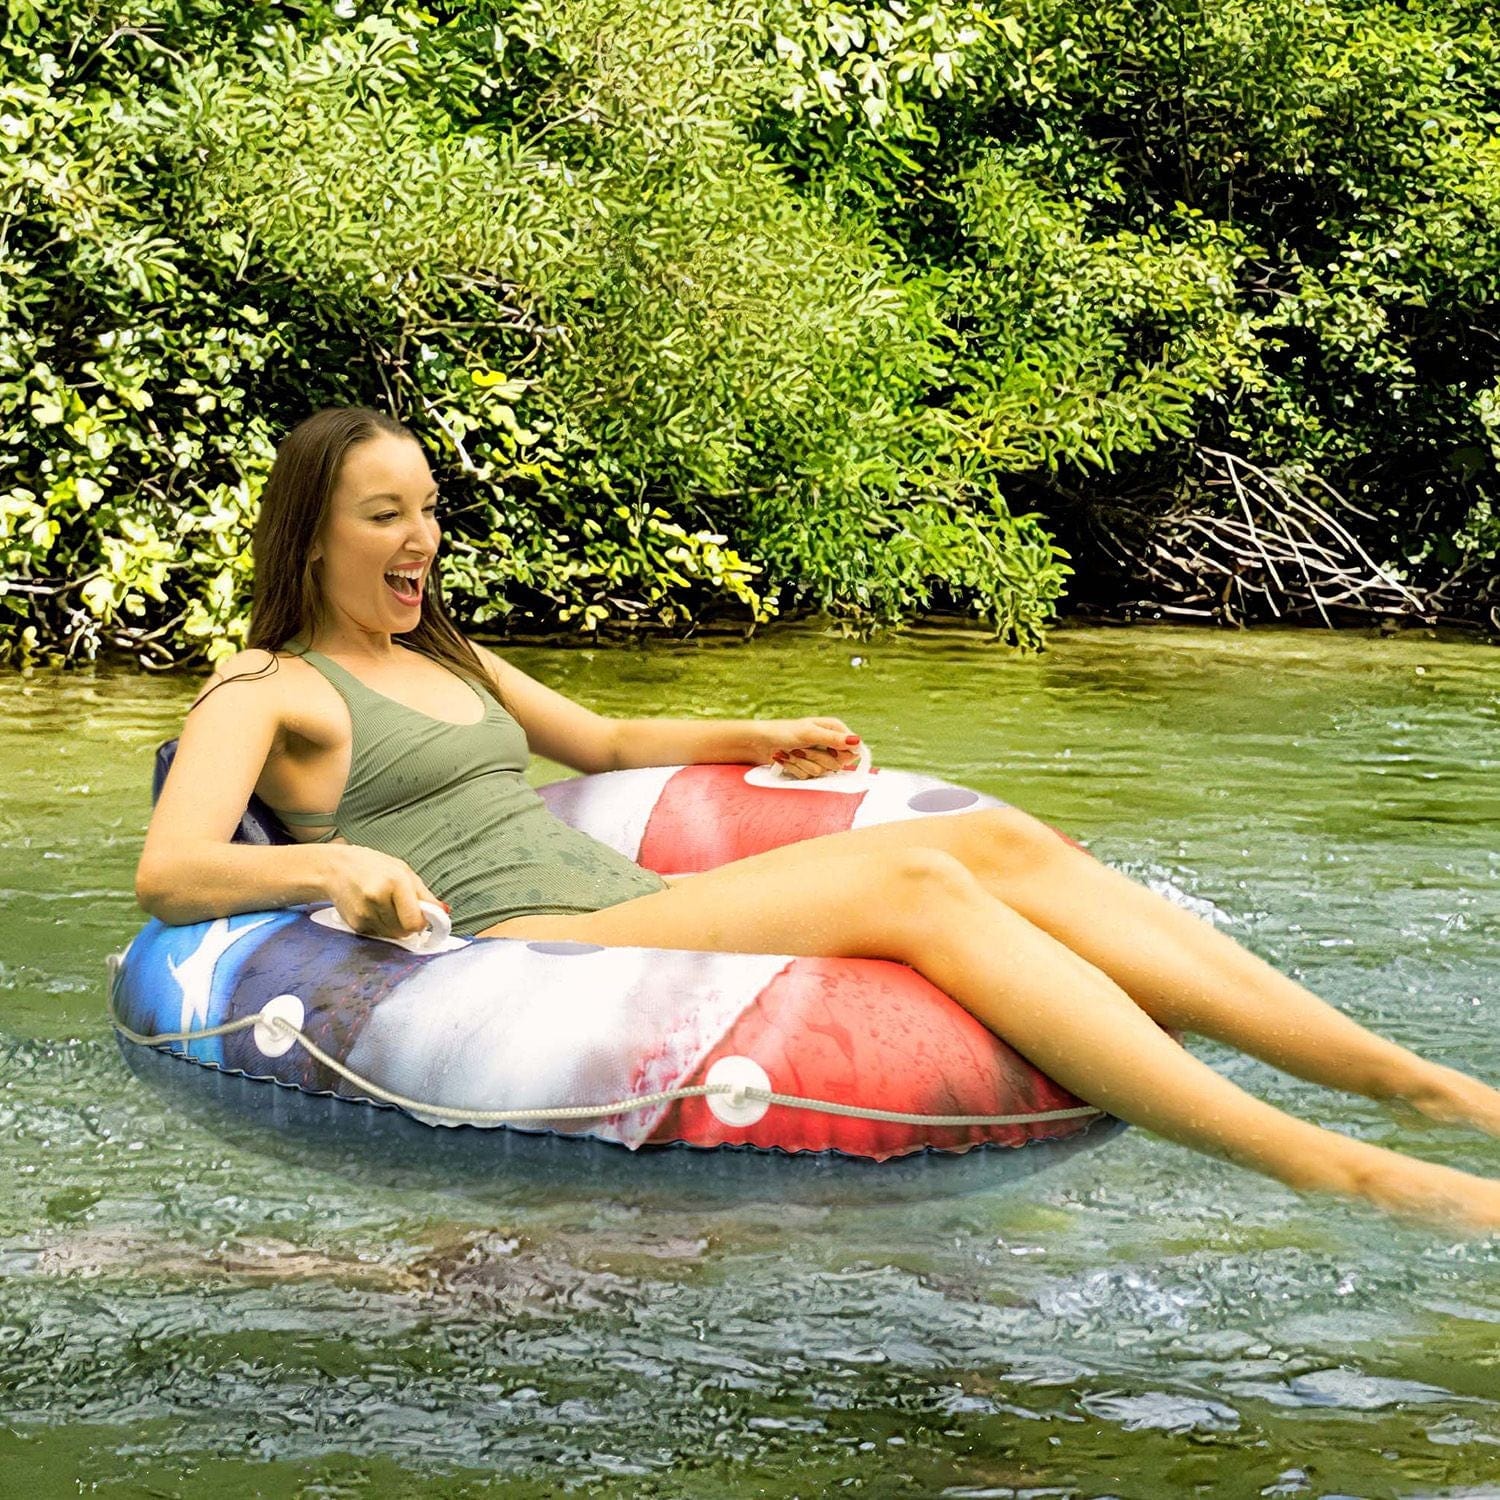 Inflatable Stars & Stripes River Tube with Back Rest Jumbo Size